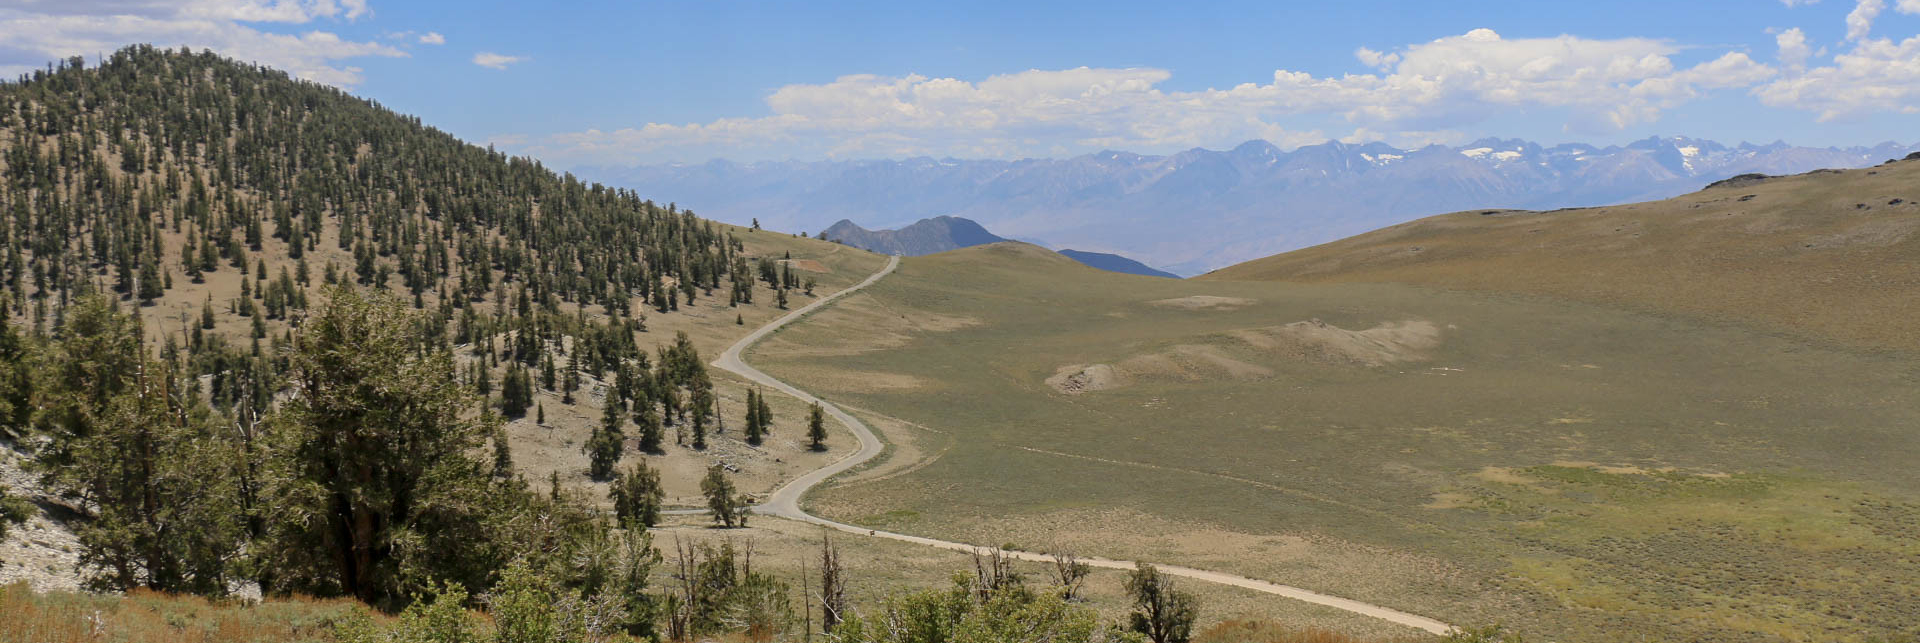 A green, high mountain valley with a road and Bristlecone Pines on the left side